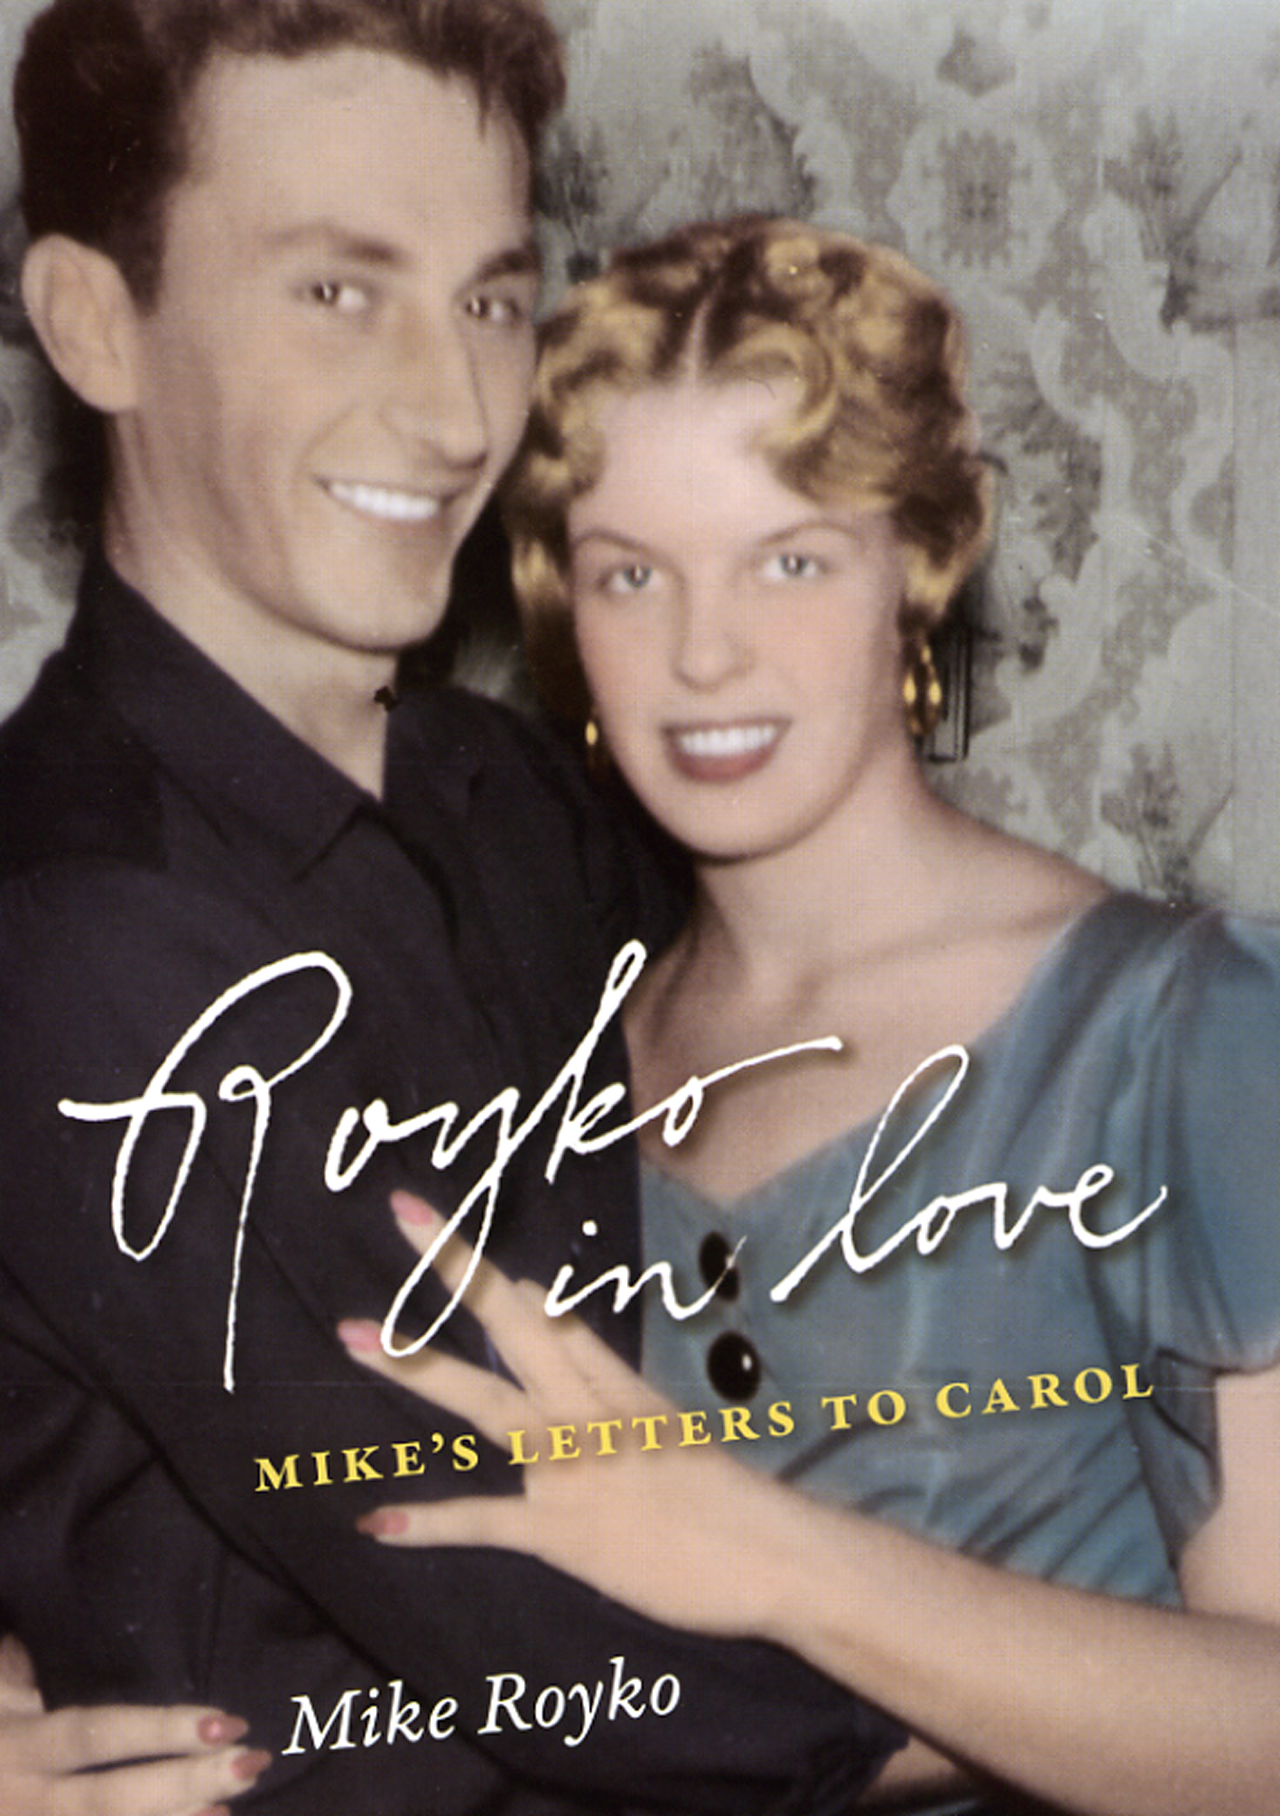 Royko In Love:  Mike's Letters to Carol